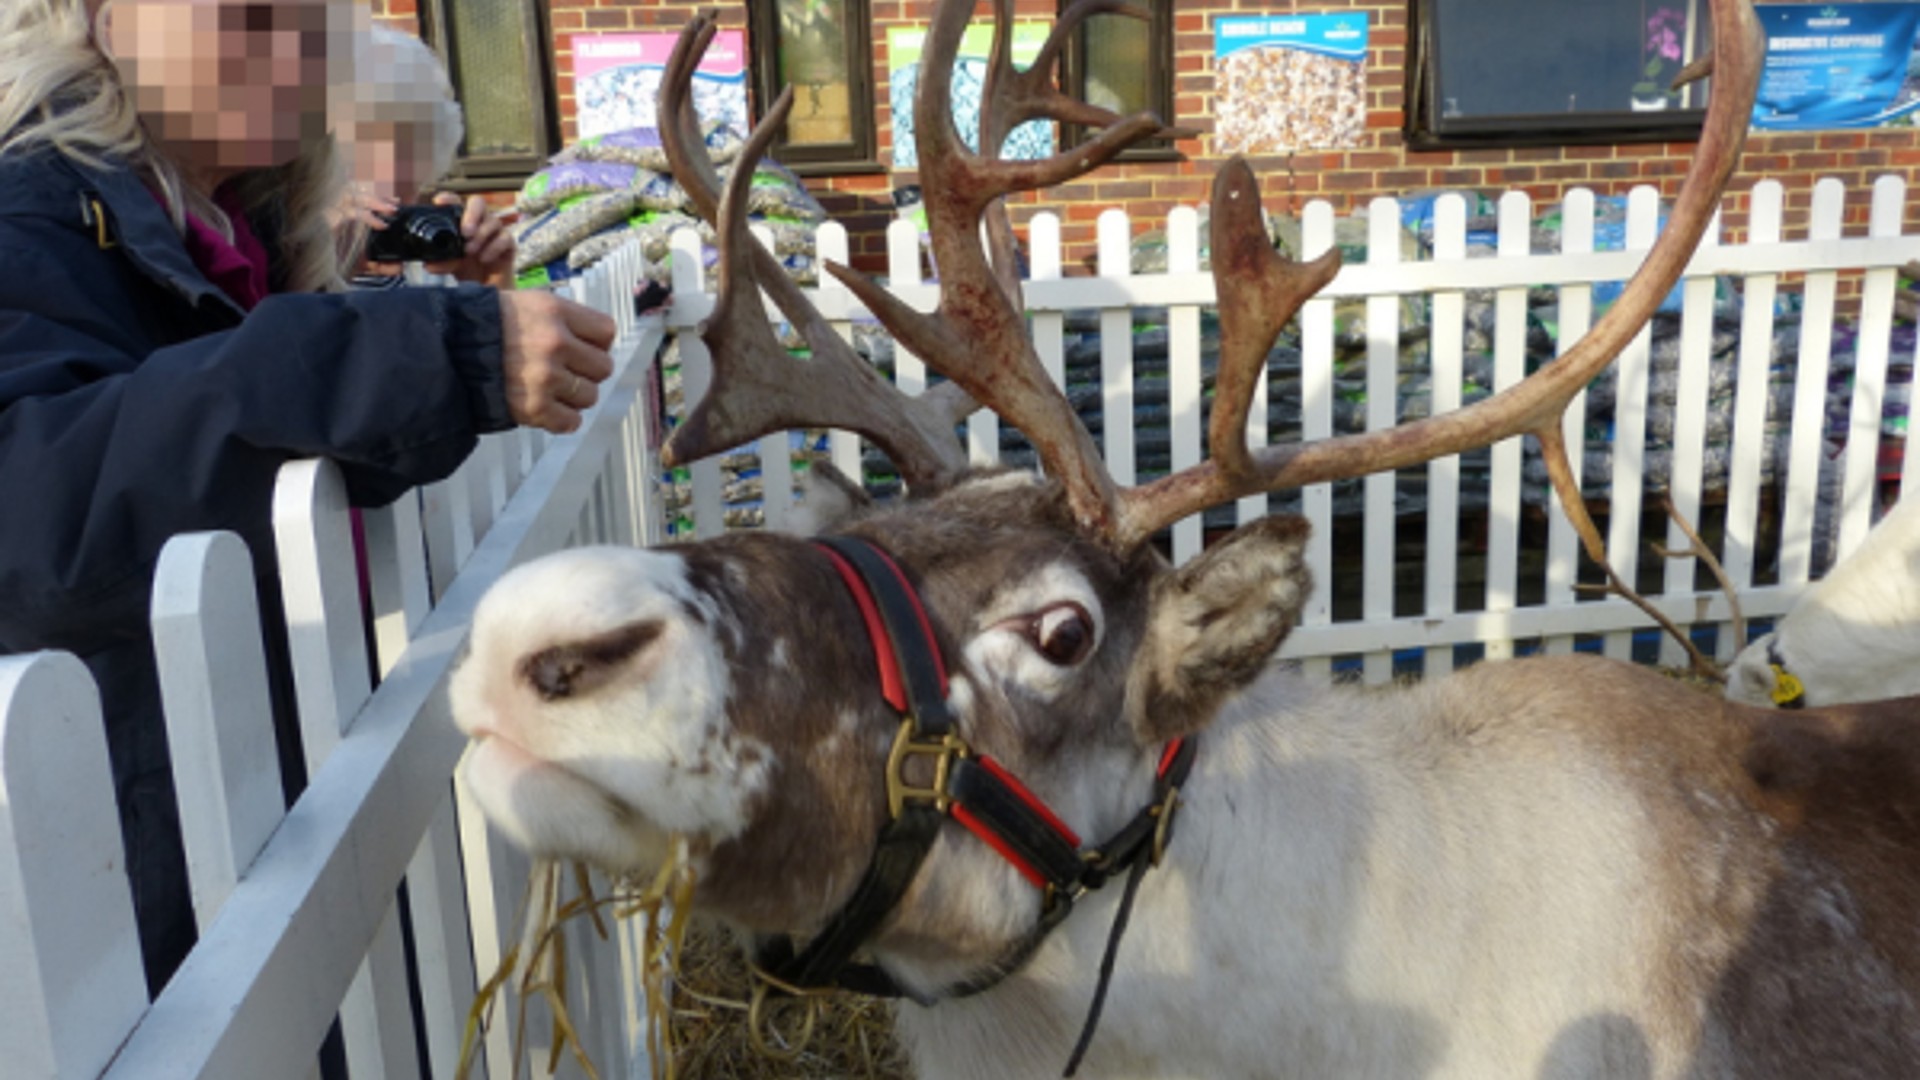 A woman leaning into a pen to take a photo of a reindeer at a festive event.